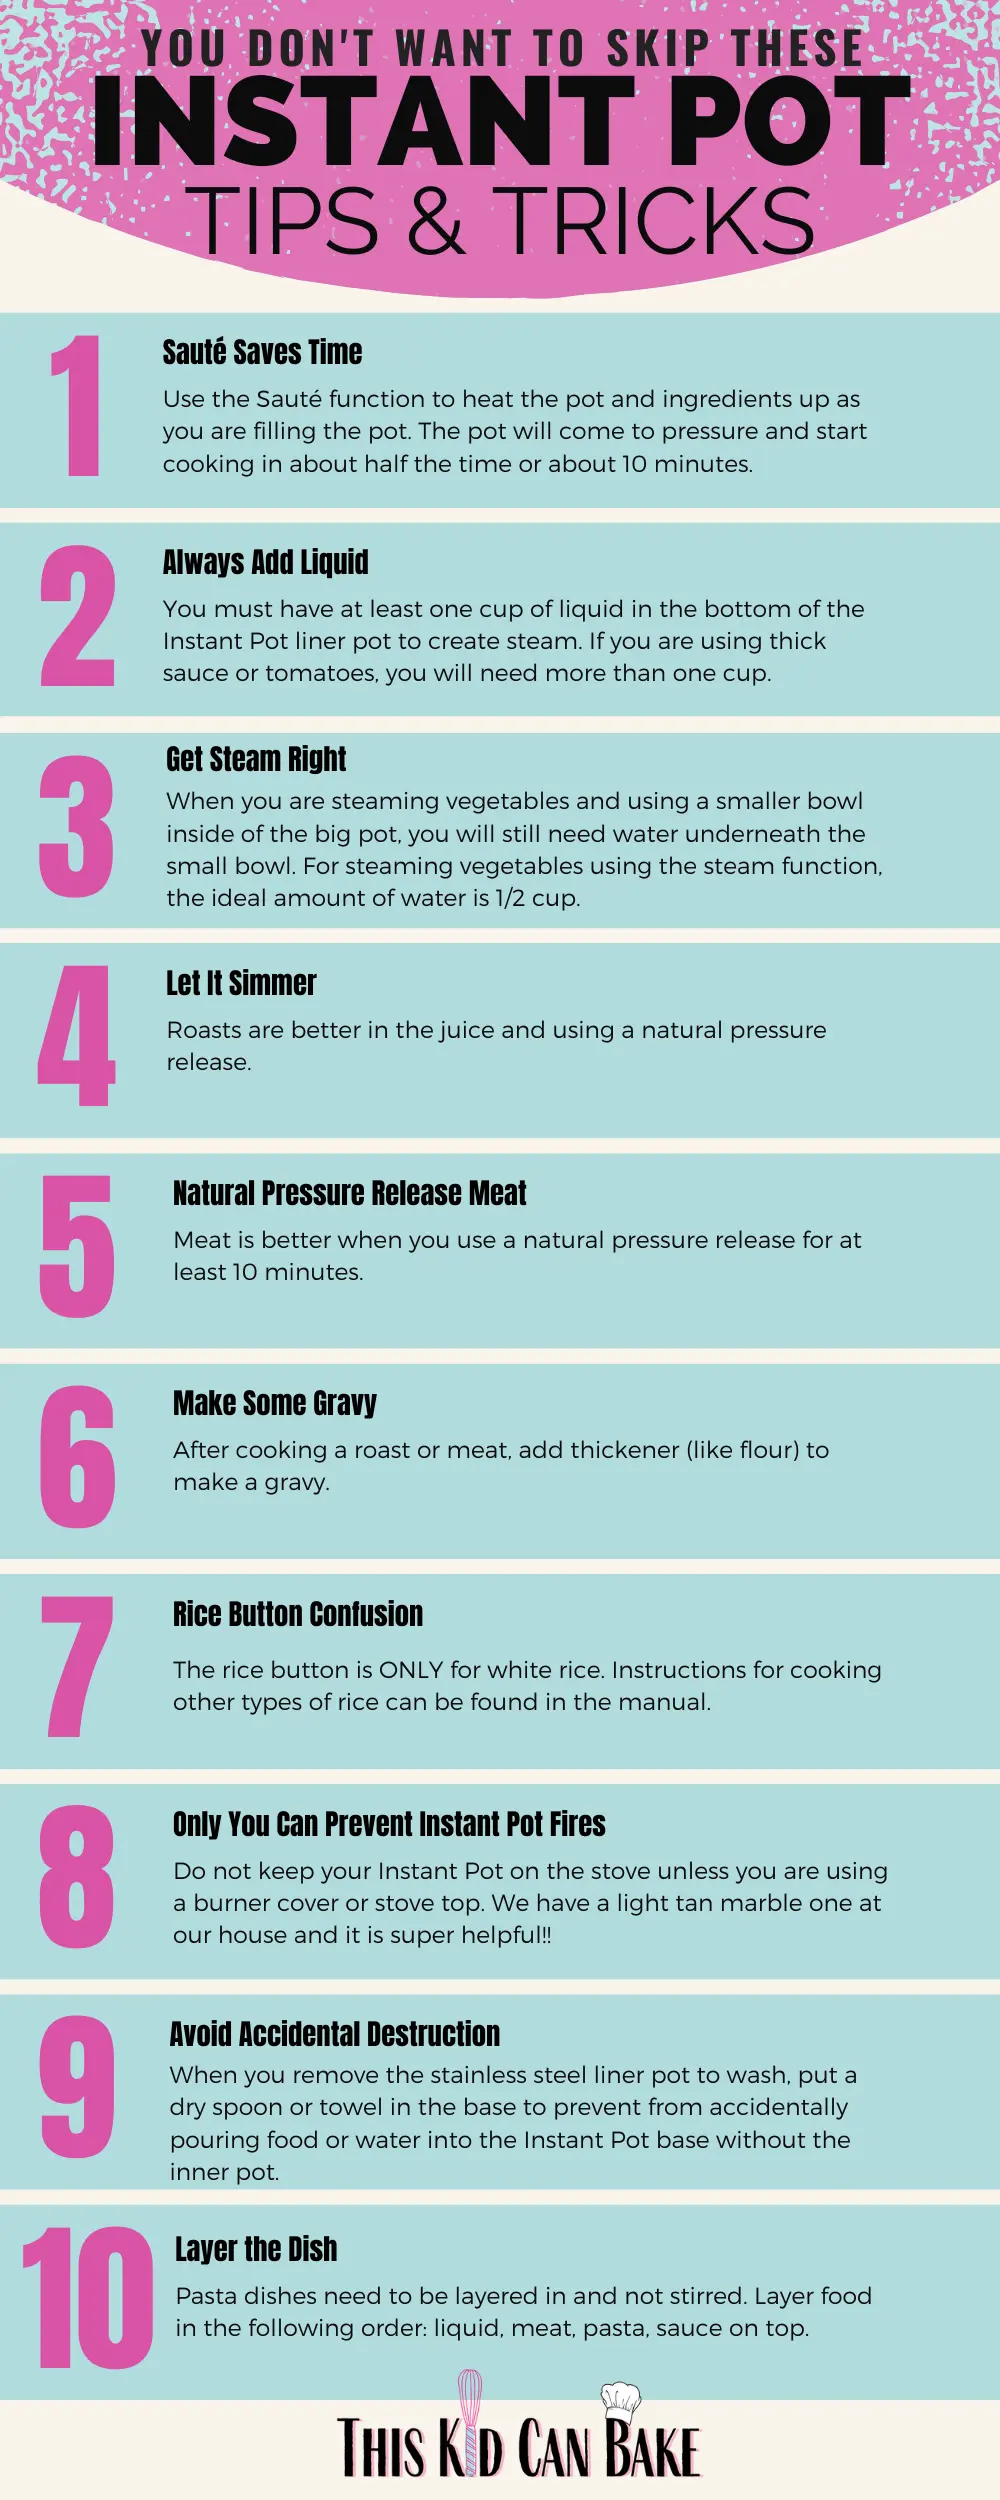 An infographic that lists 10 tips for using an Instant Pot.